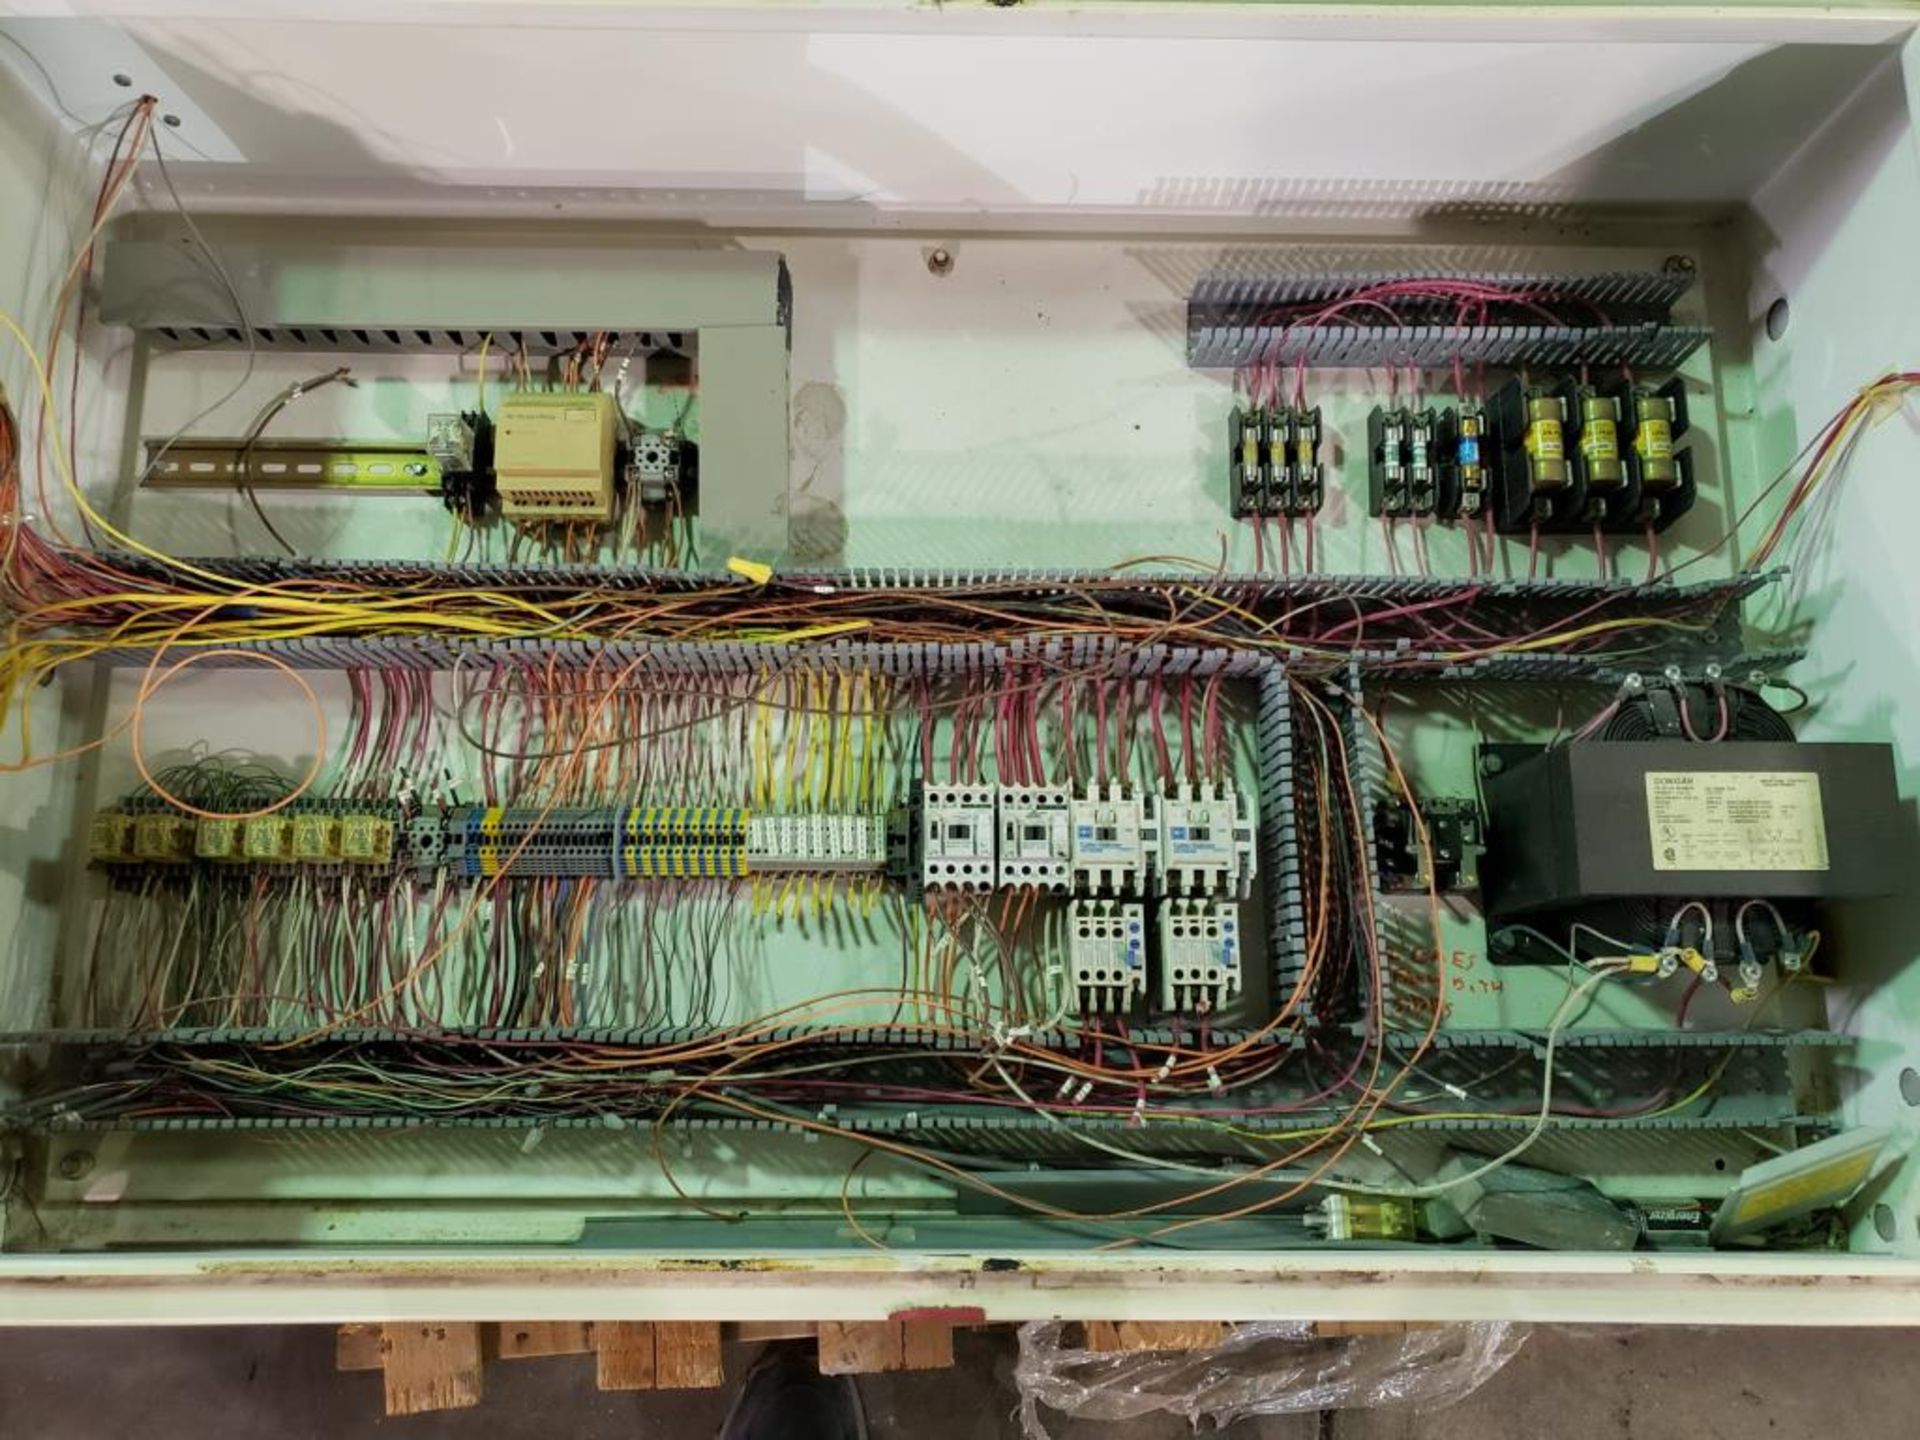 Furnace Controller Cabinet - Image 4 of 12